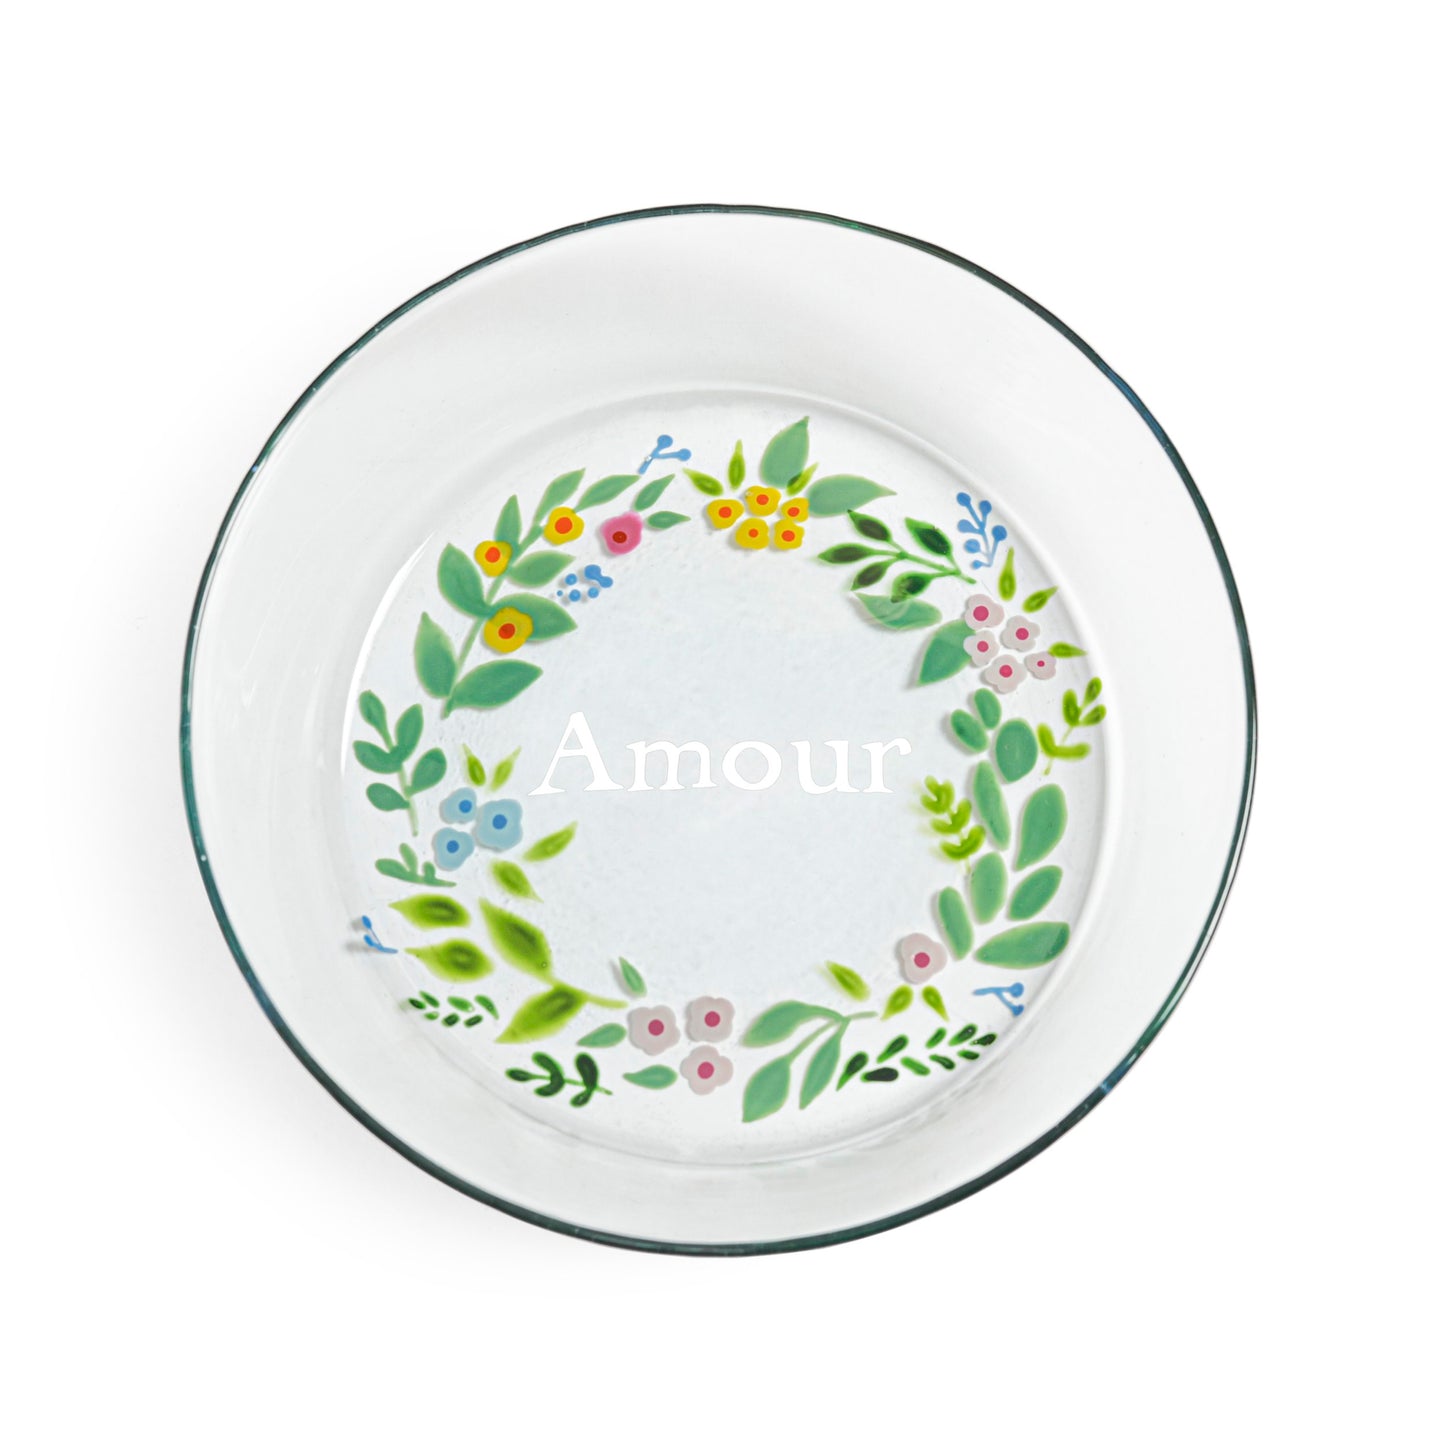 Hand painted plate | CROWN OF FLOWERS: LOVE